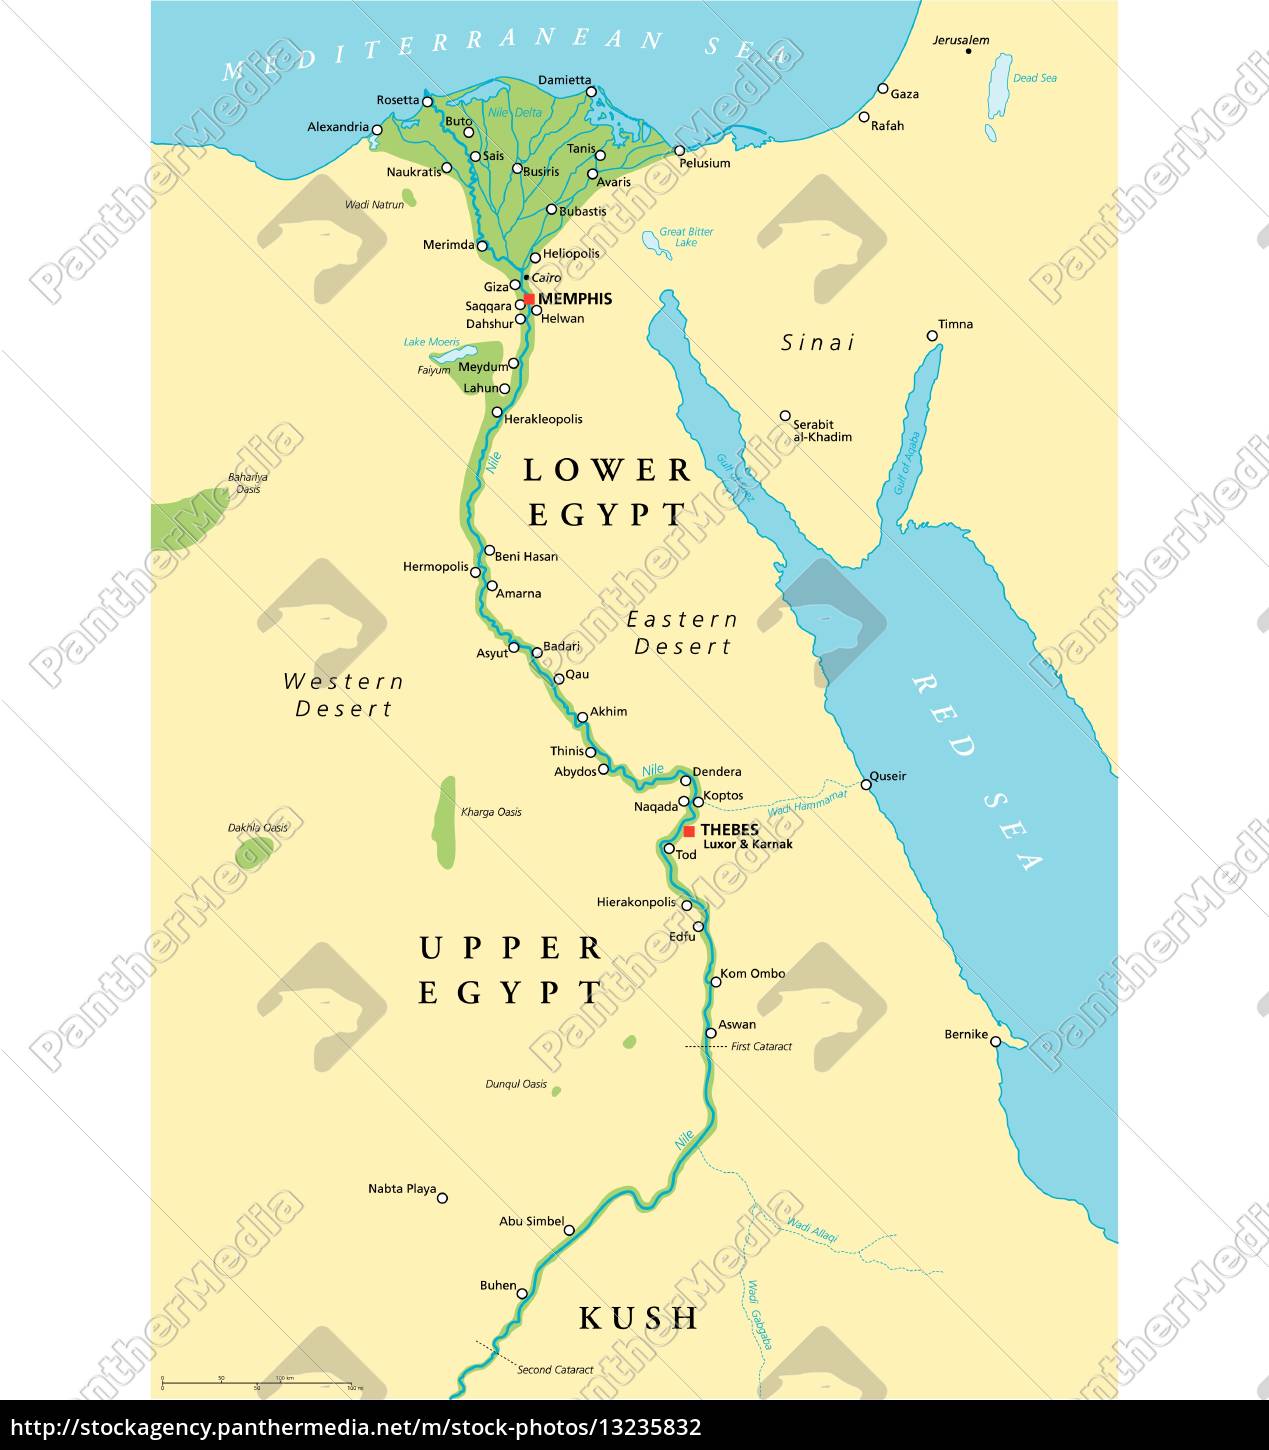 ancient egypt map labeled Ancient Egypt Map Royalty Free Photo 13235832 Panthermedia ancient egypt map labeled